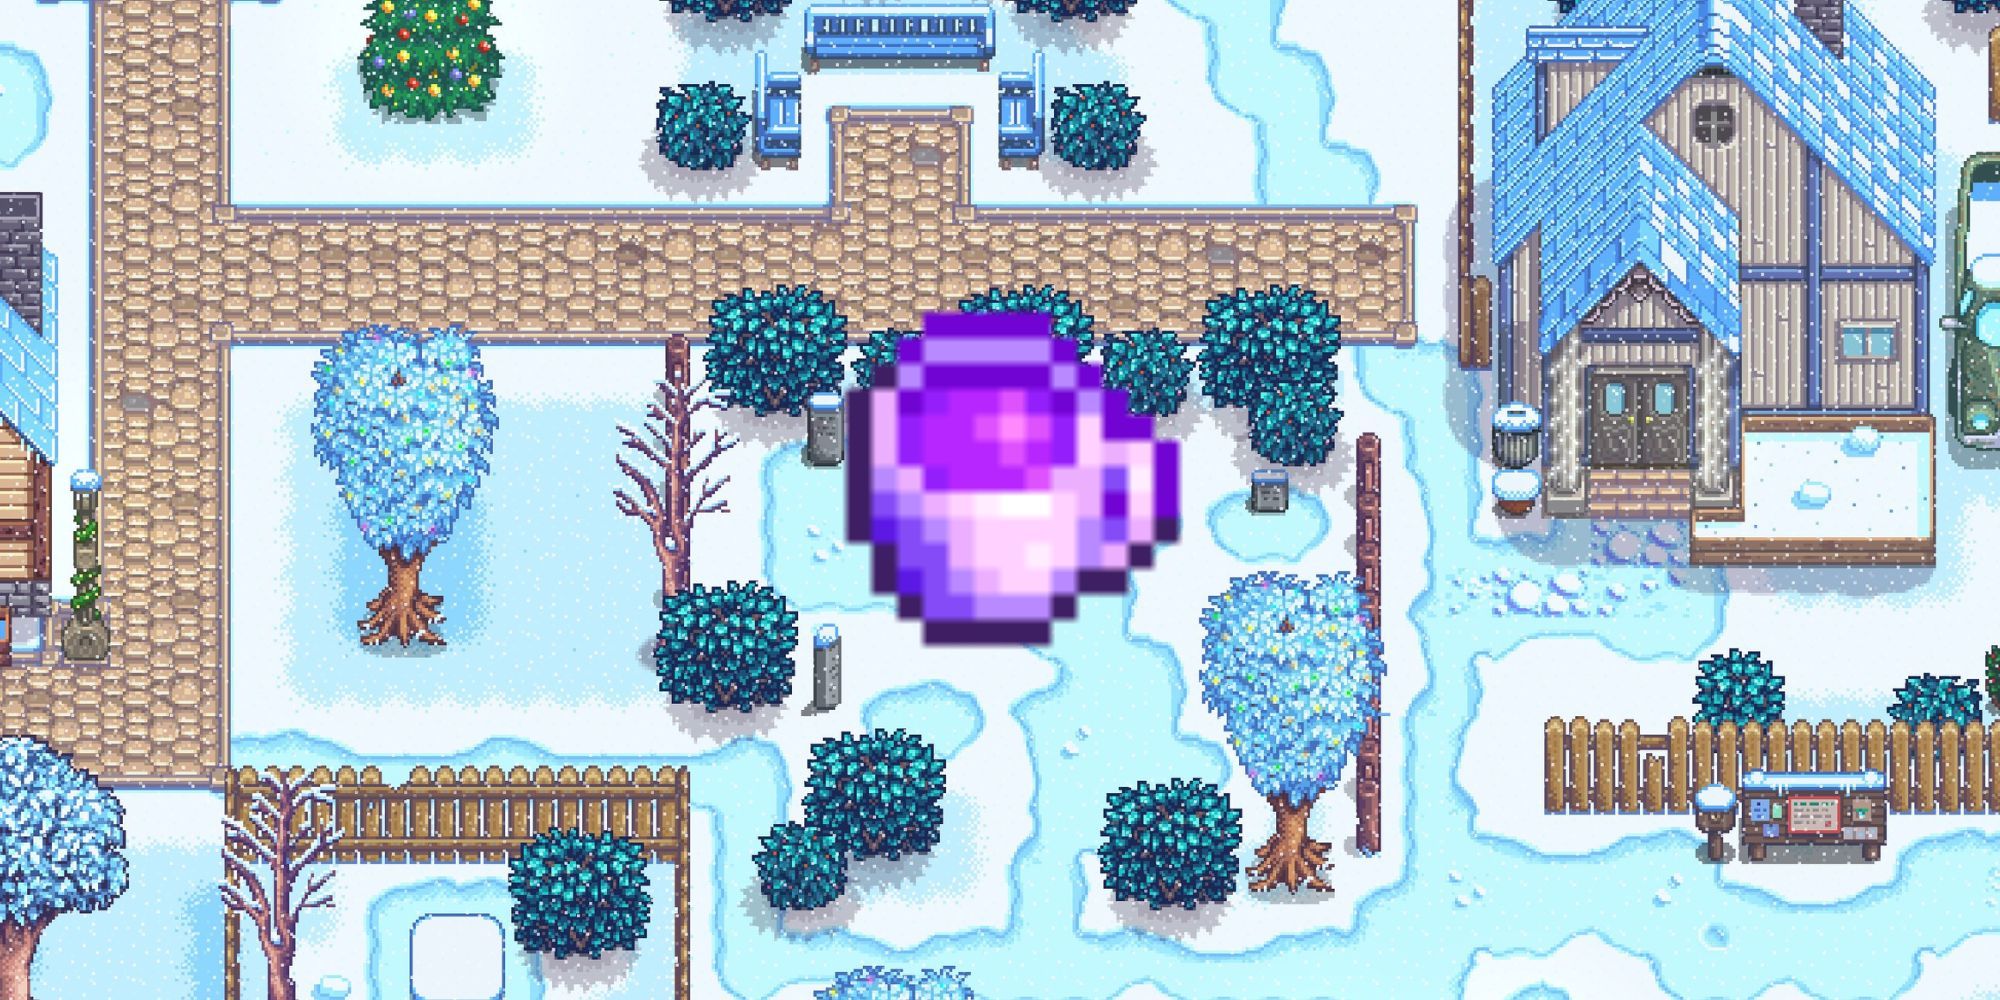 Stardew Valley: An image of Stardrop Tea set over an image of Pelican Town in the wintertime